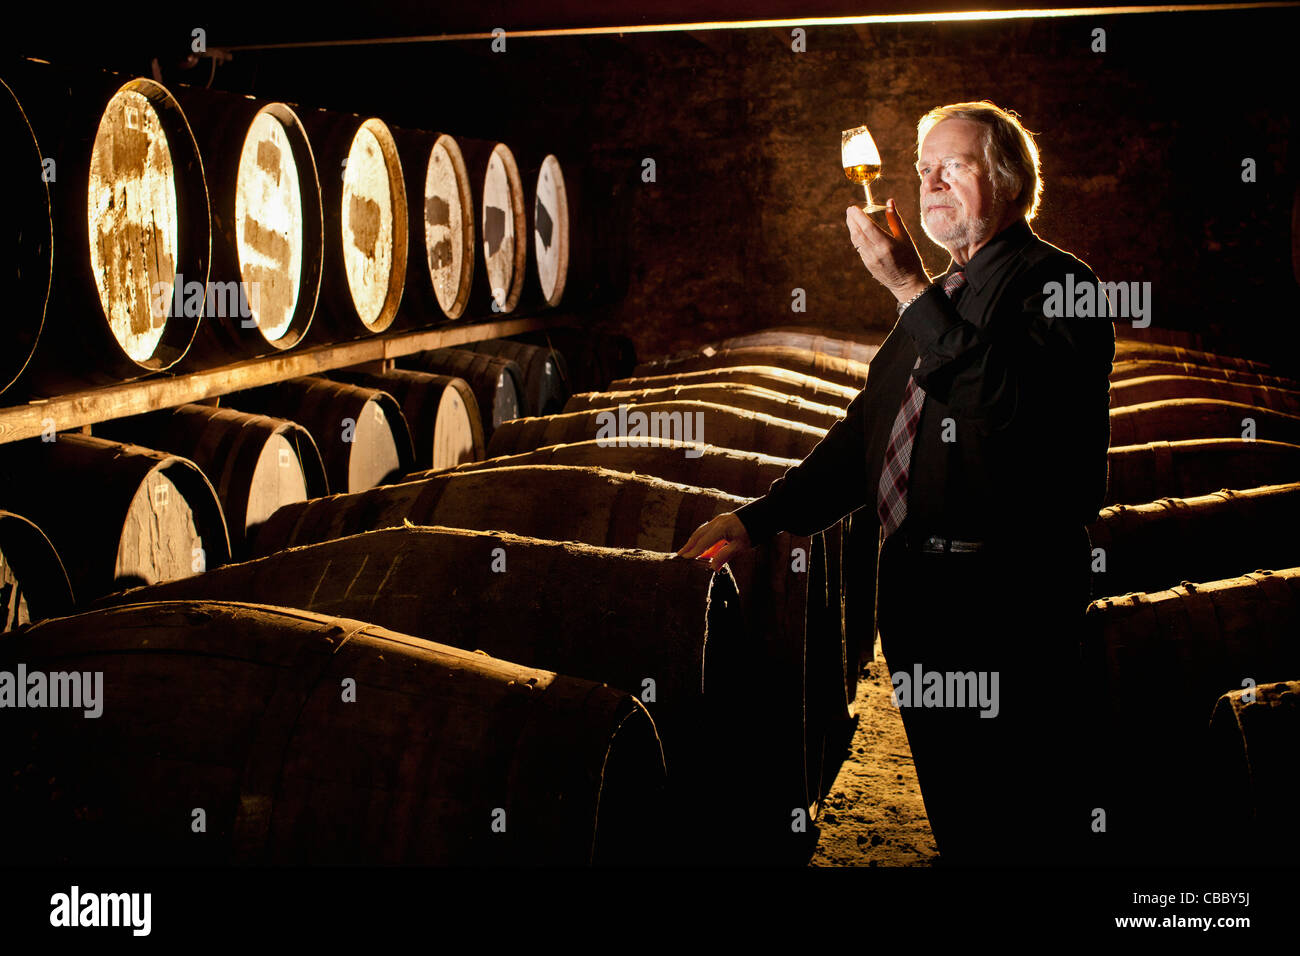 Worker testing whisky in distillery Stock Photo